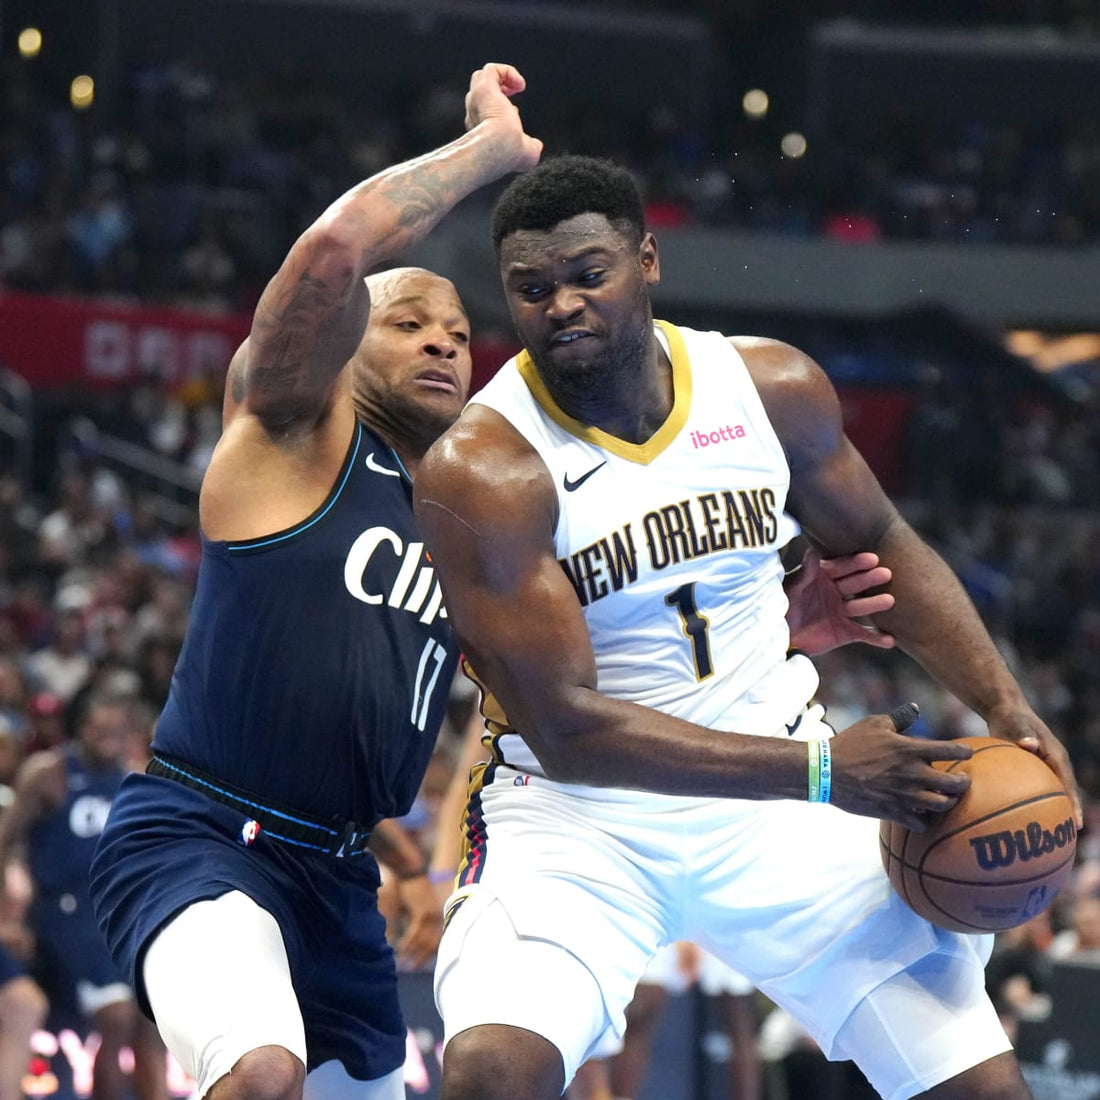 Pelicans hope to continue 4 game winning streak against Clippers